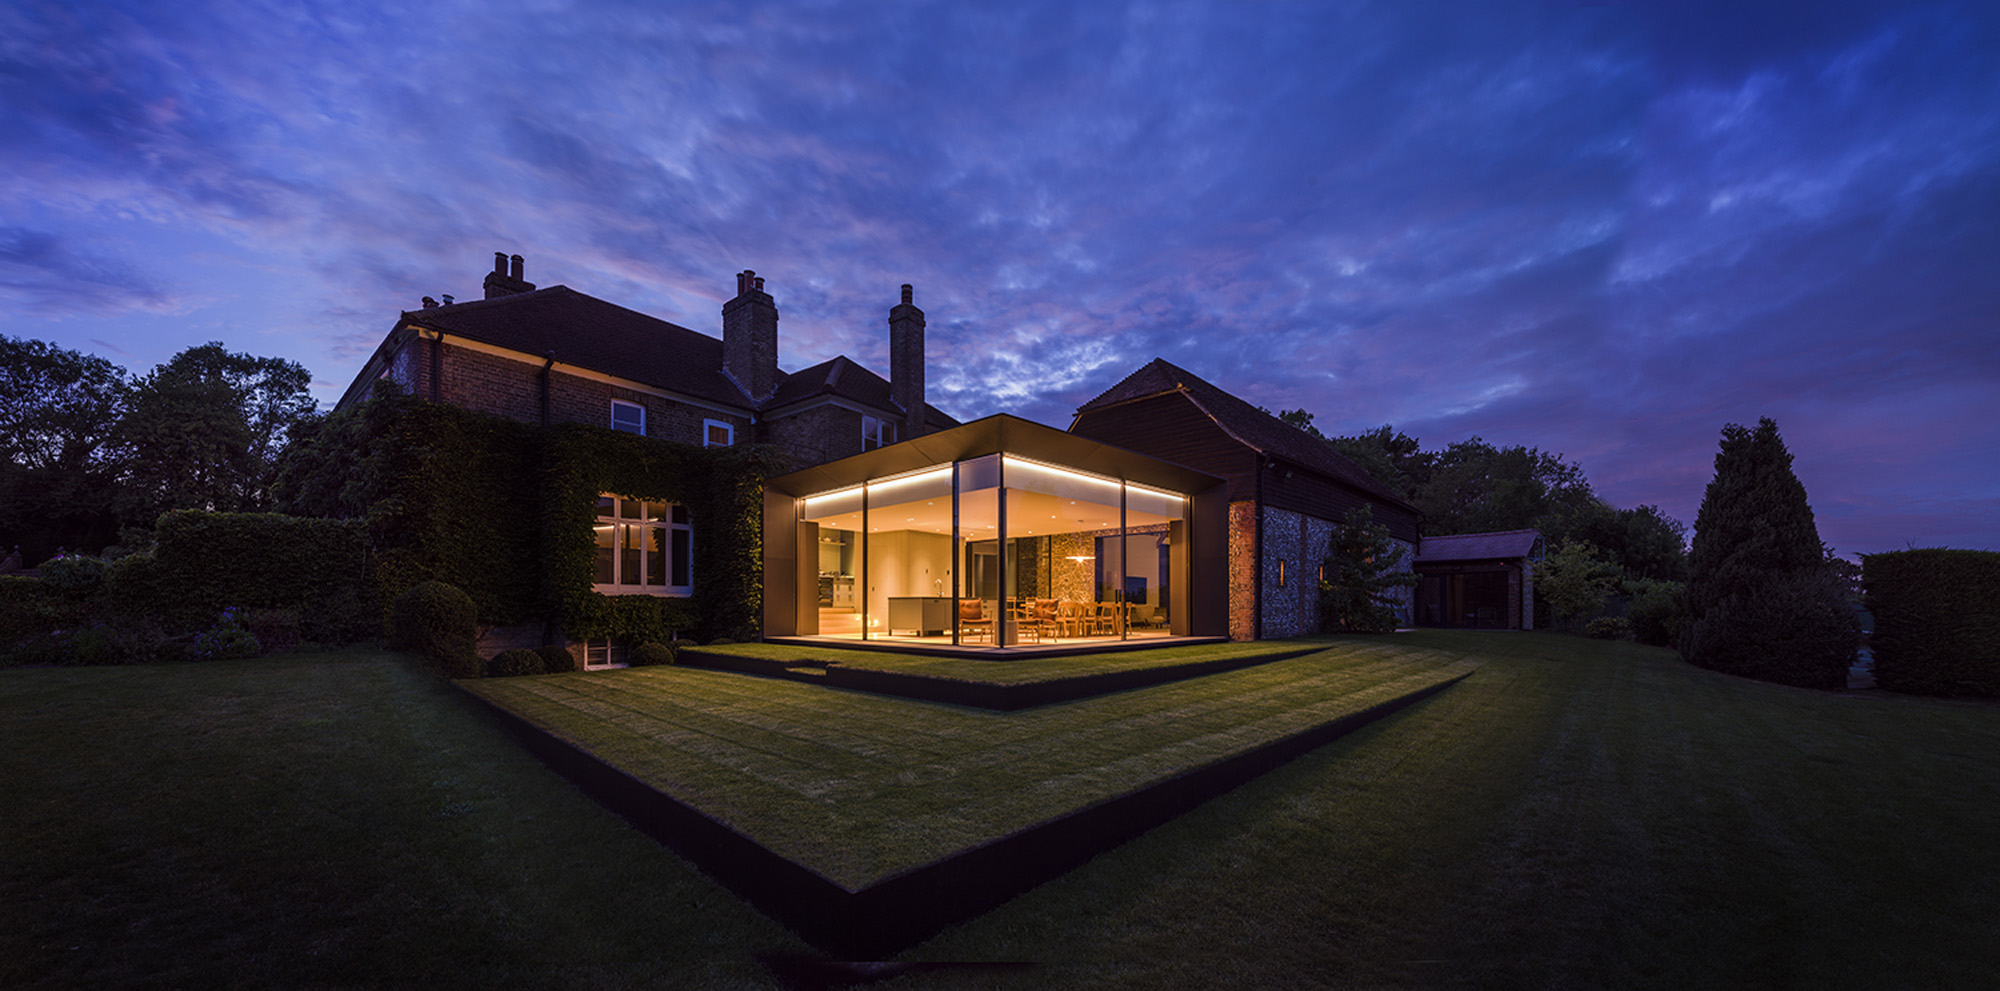 A modern extension to a classic home glows with electric light